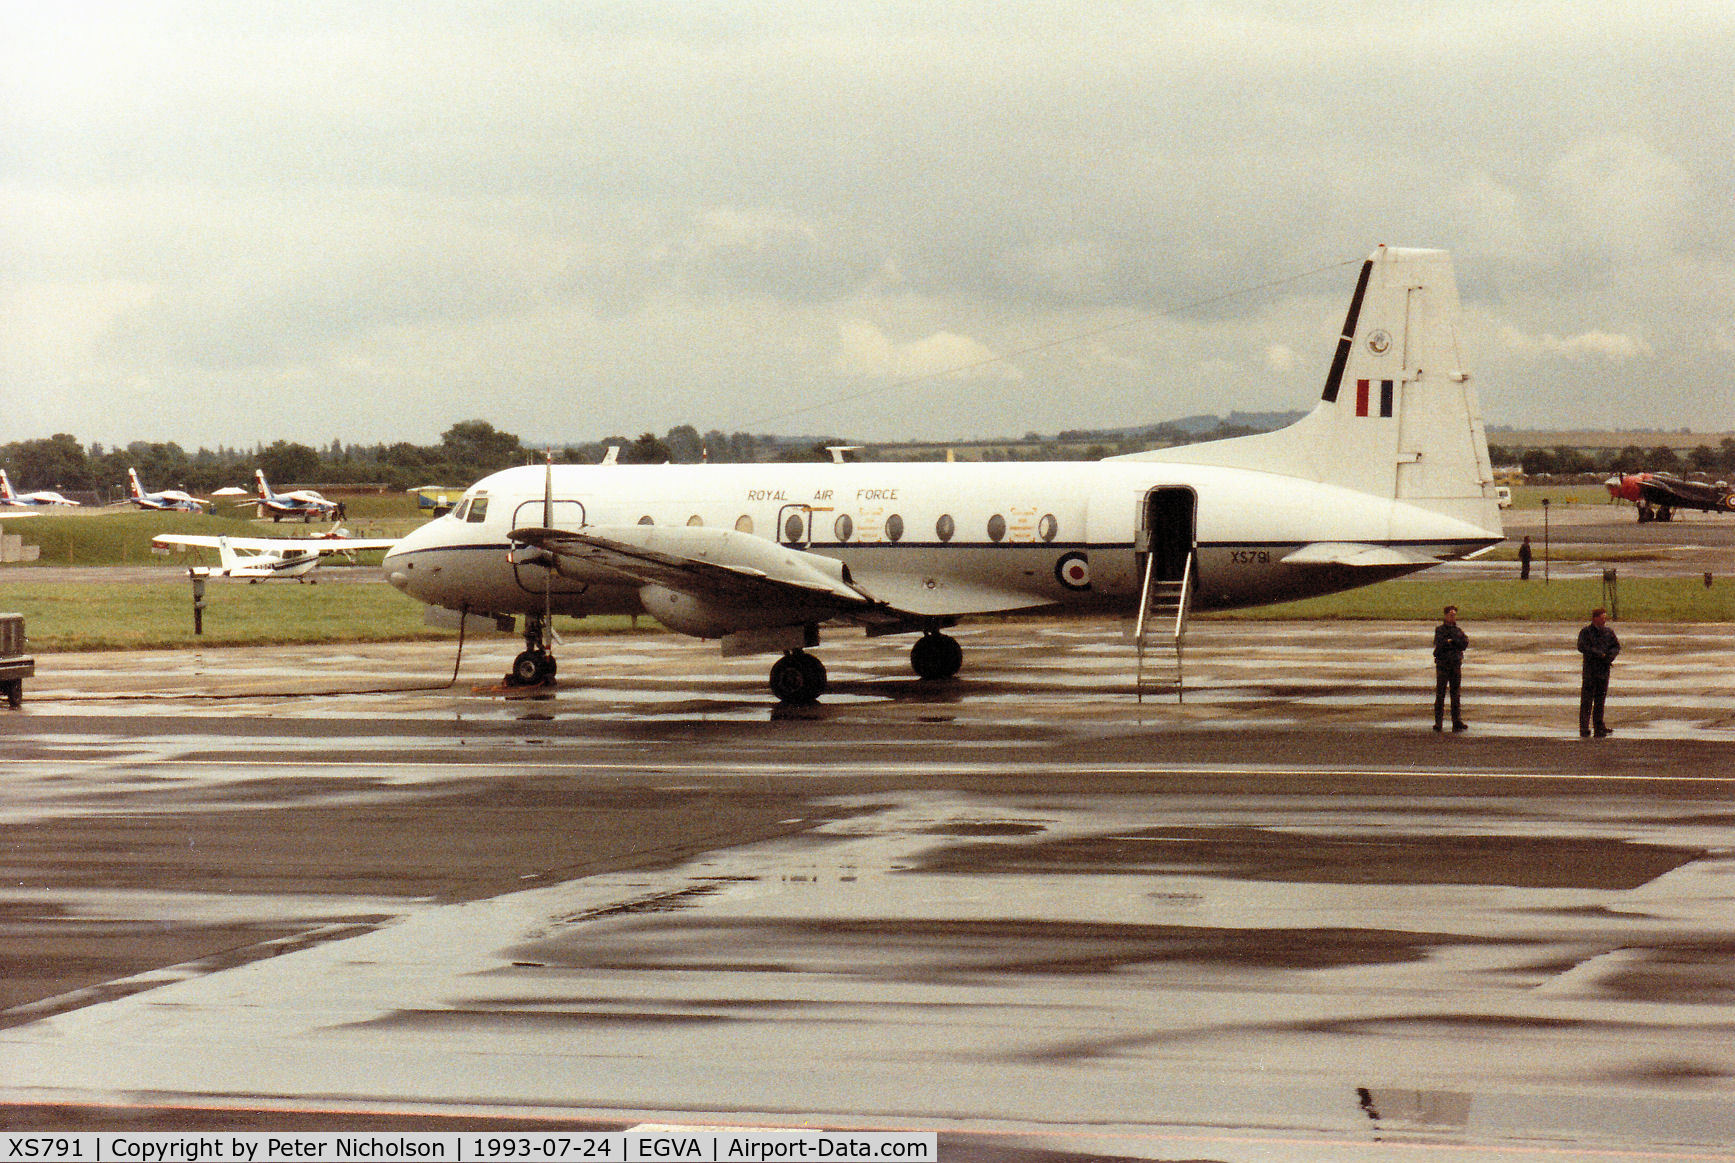 XS791, 1964 Hawker Siddeley HS-748 Andover CC2 C/N 1563, Andover CC.2, callsign Ascot 1001, of 32 Squadron at RAF Northolt on the flight-line at the 1993 Intnl Air Tattoo at RAF Fairford.